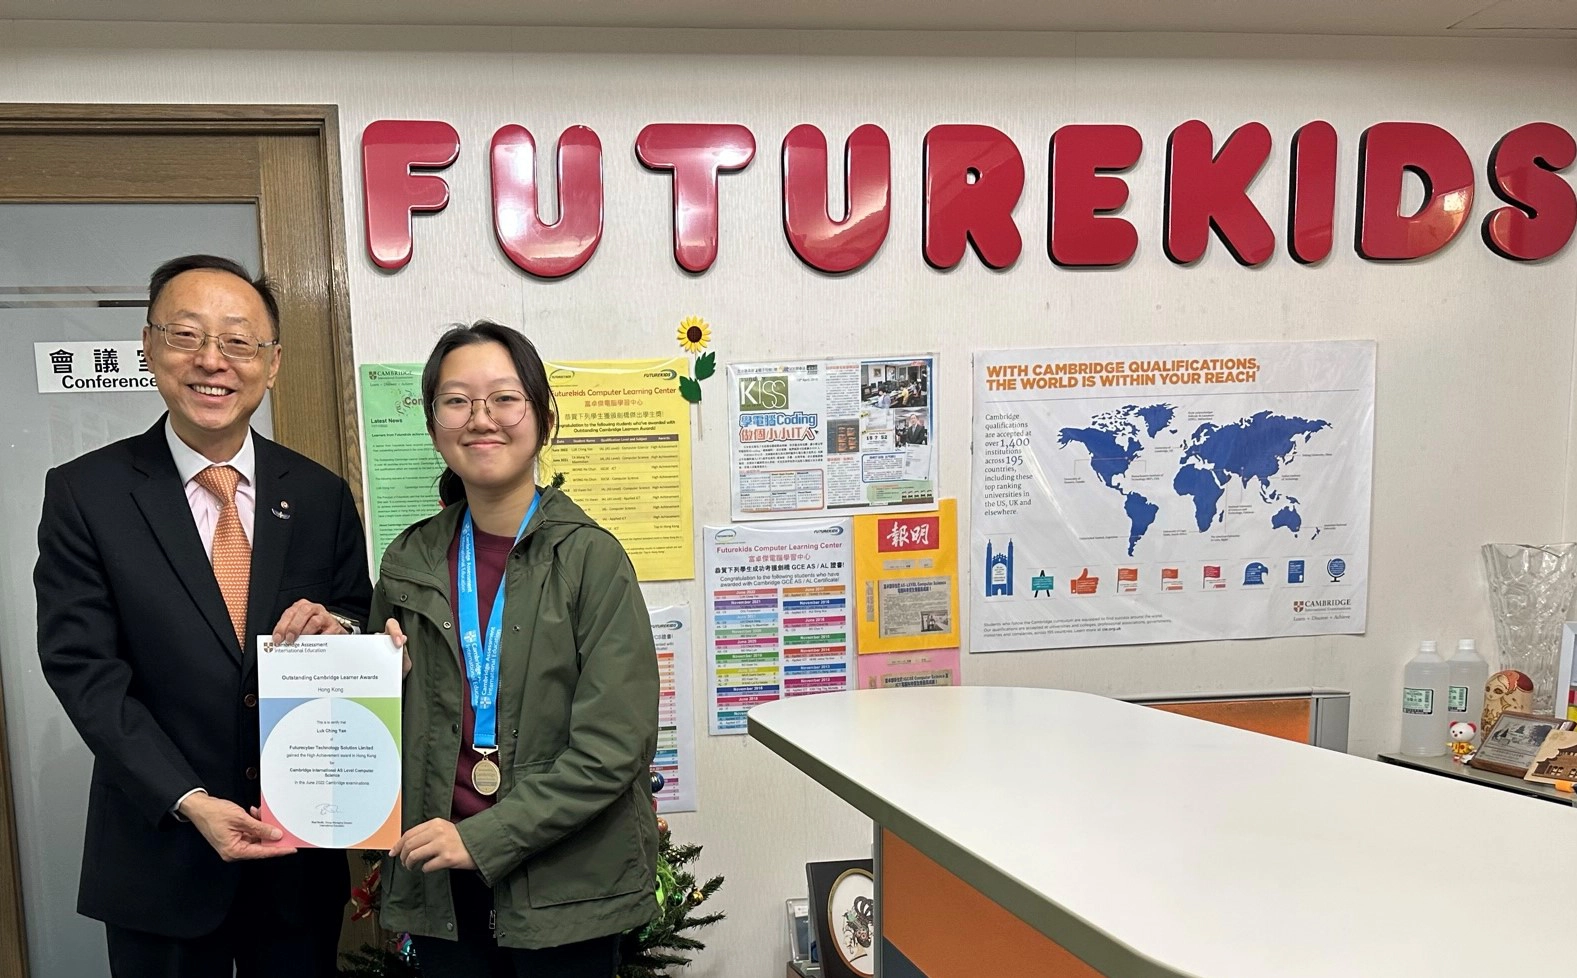 Dr. Chin presented the Outstanding Cambridge Learners Awards certificate and medal to Luk Ching Yan